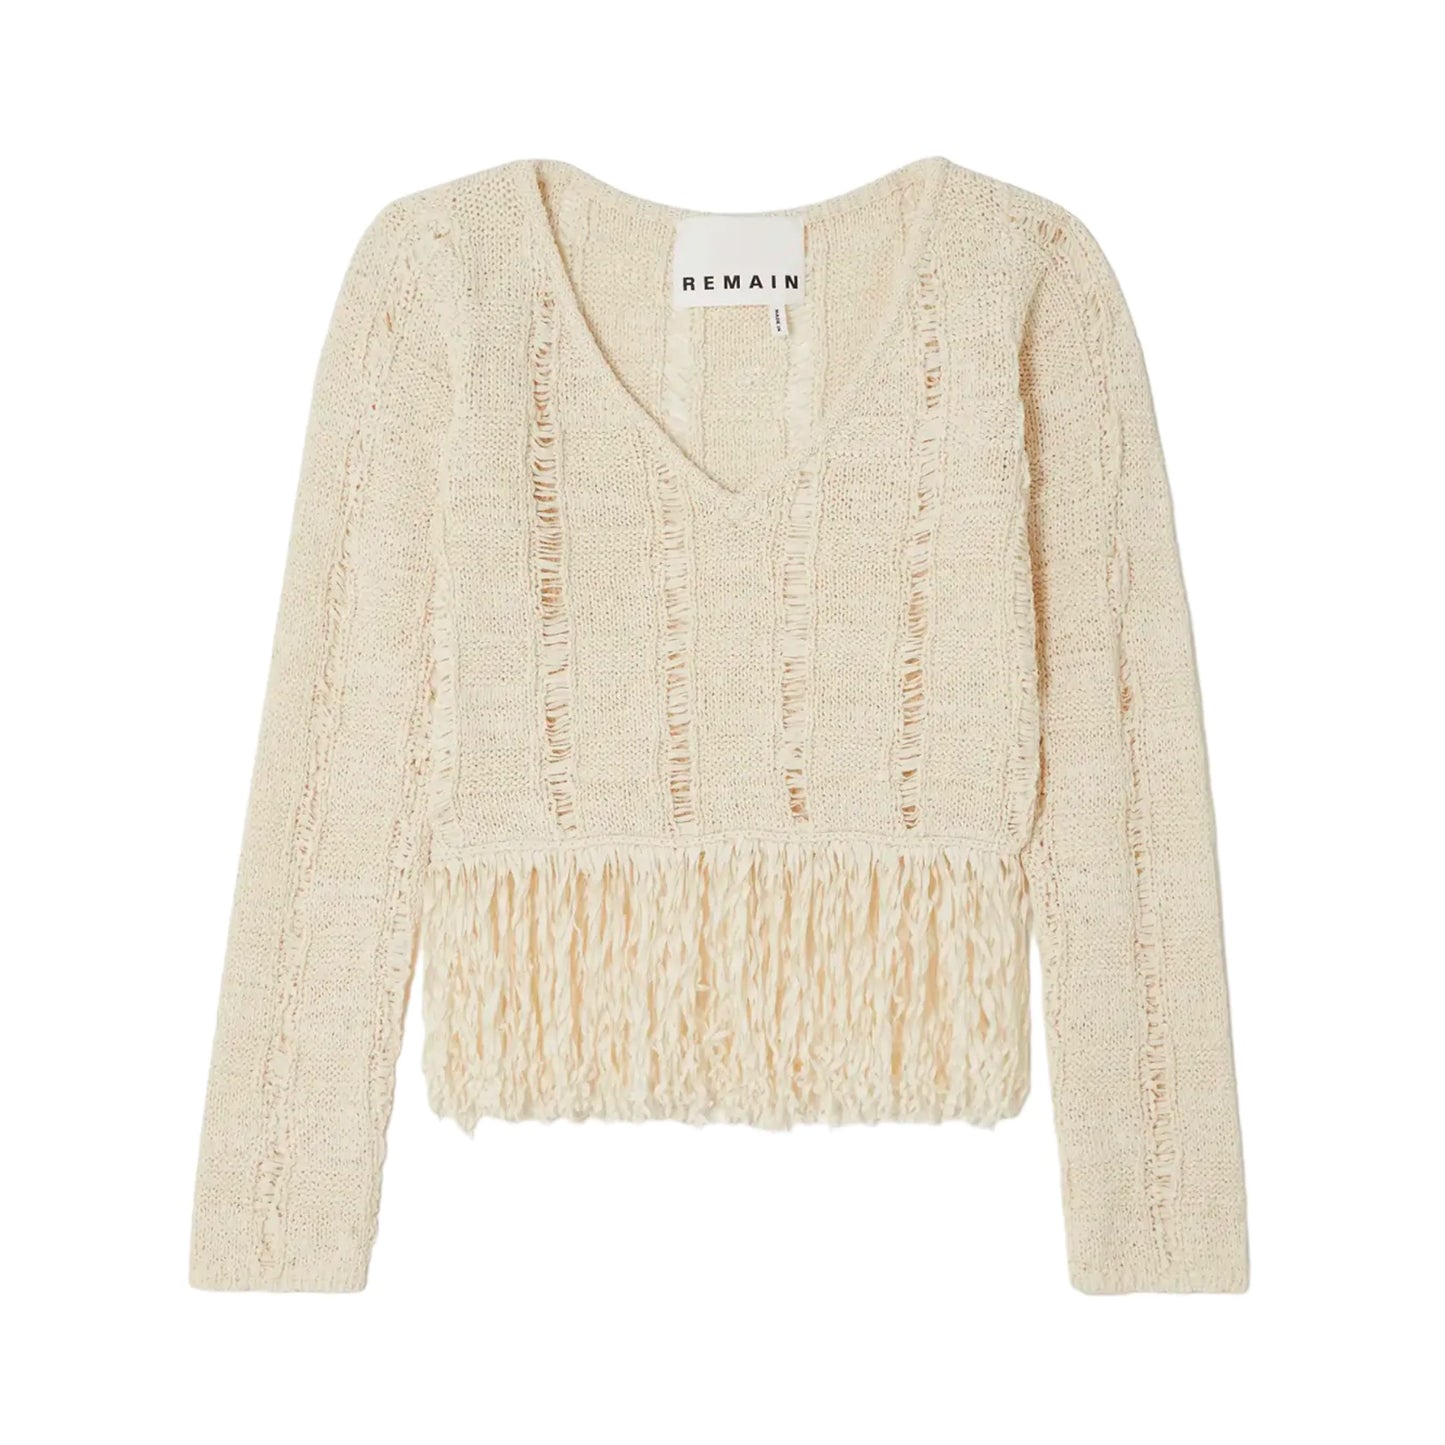 Remain Crochet Fringed Top - NWT